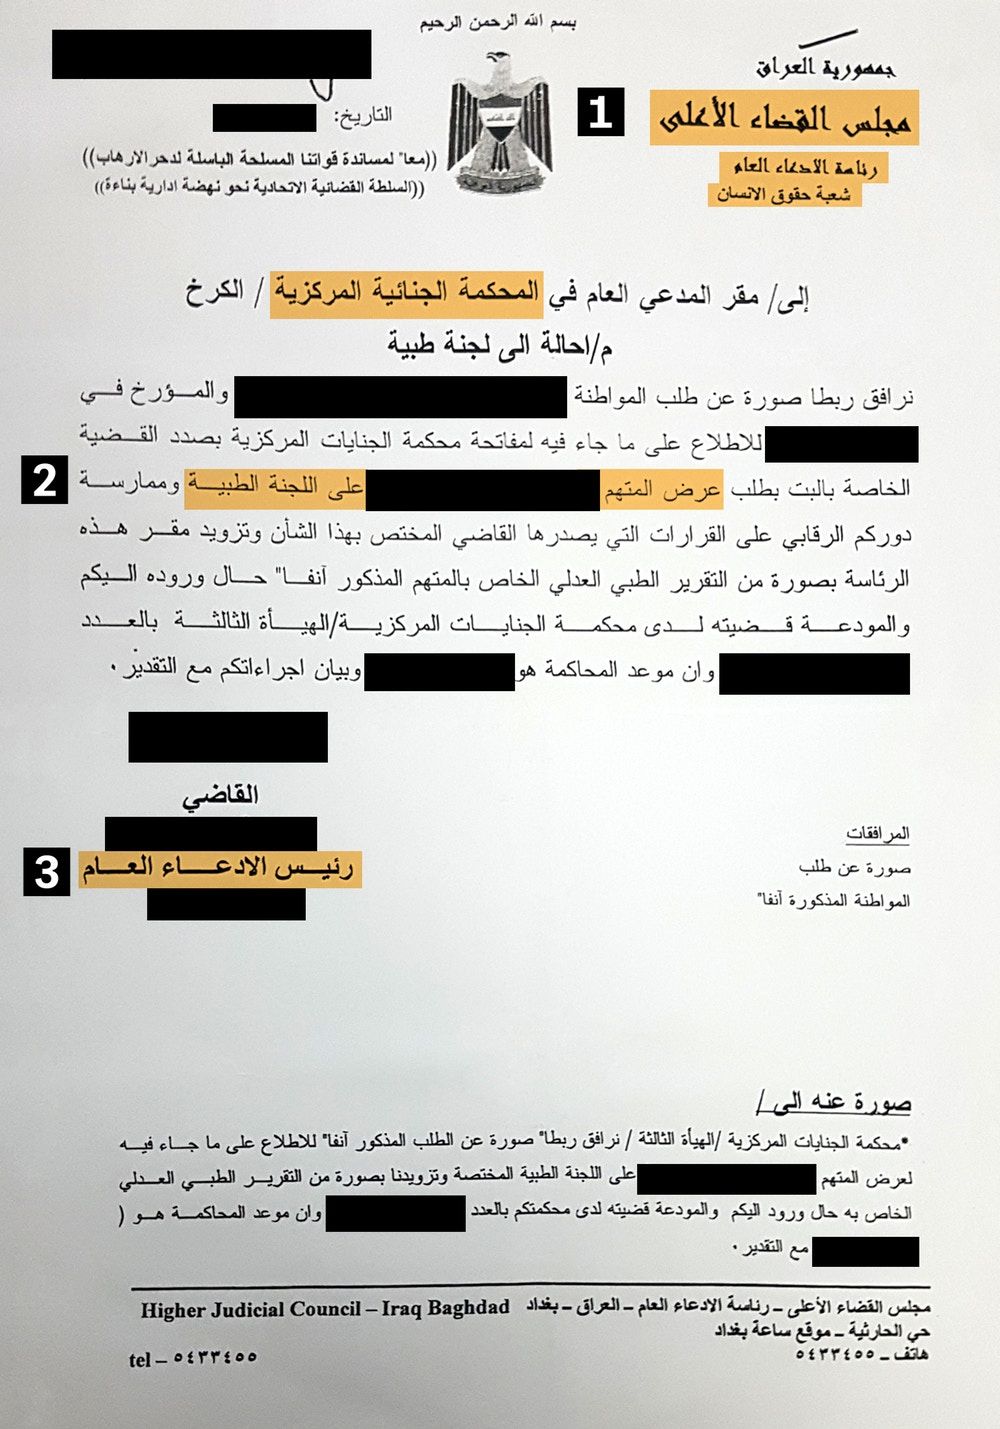 At the behest of Ahmed’s lawyer and family, the human rights department at the general prosecutor’s office sent two requests to the criminal court to refer Ahmed for a medical exam to confirm whether he had confessed under torture. Both requests went unanswered. Image provided by The Intercept, 2018.